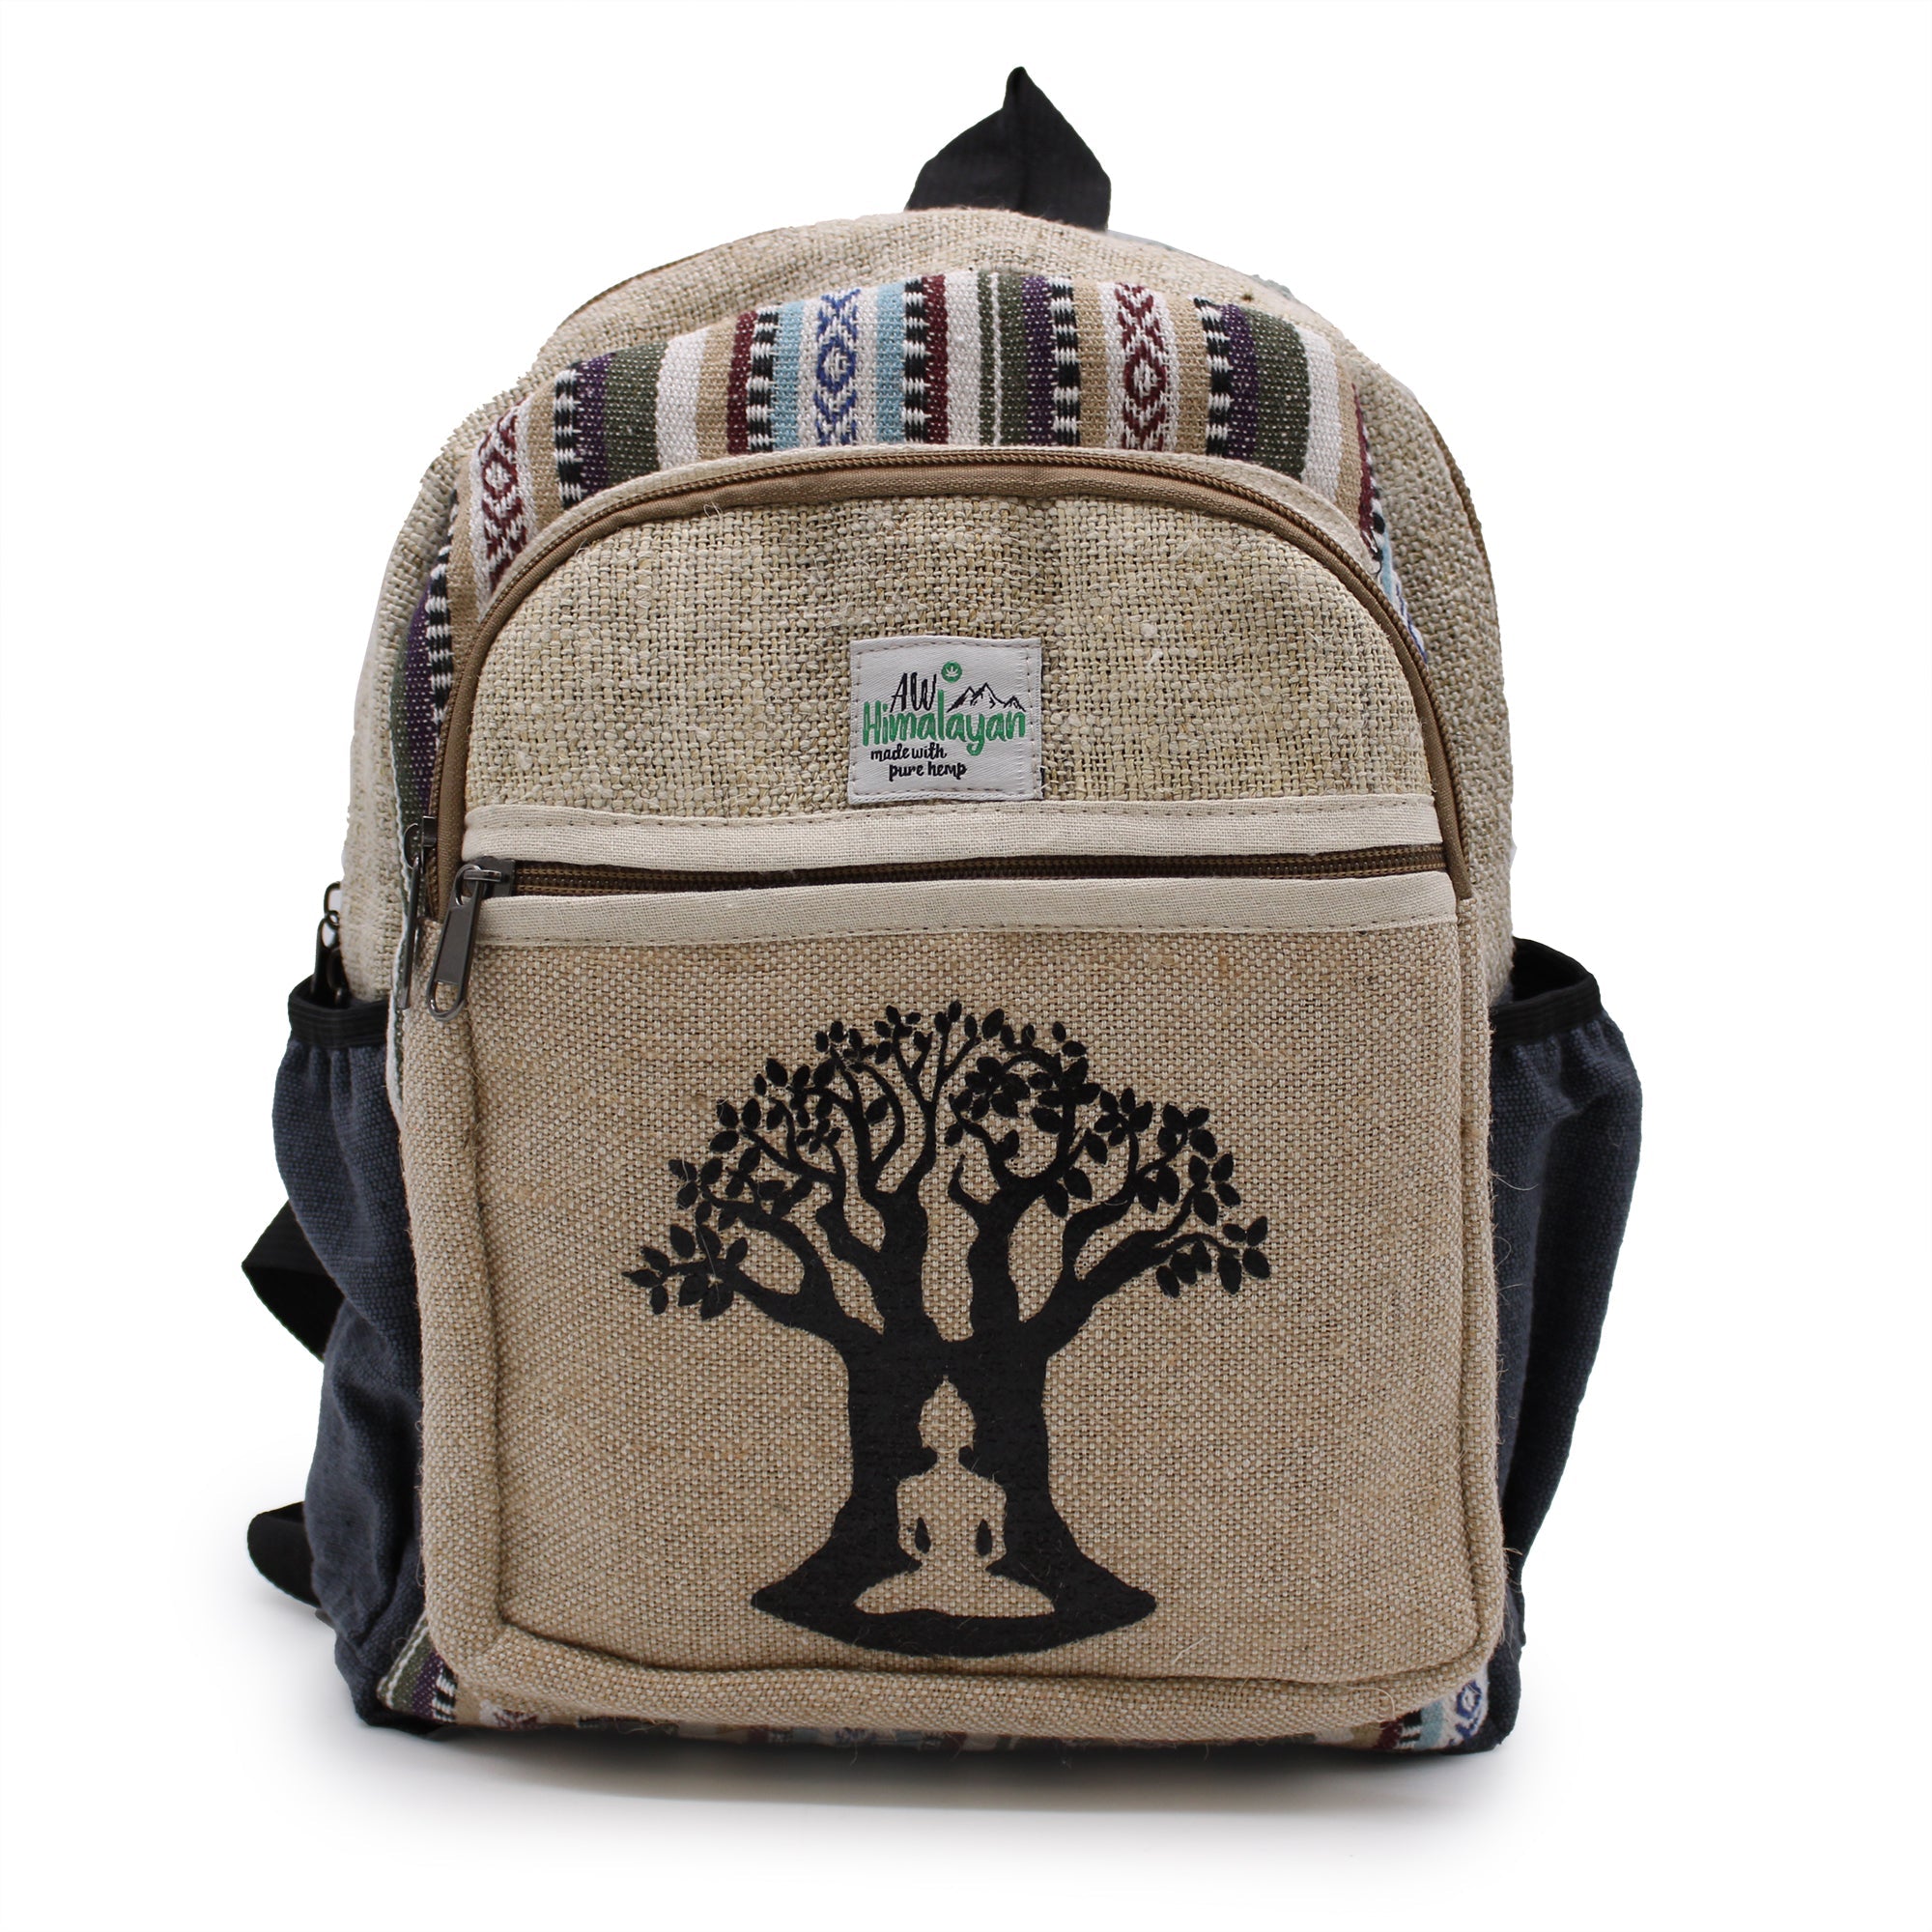 View Small Backpack Bohdi Tree Design information